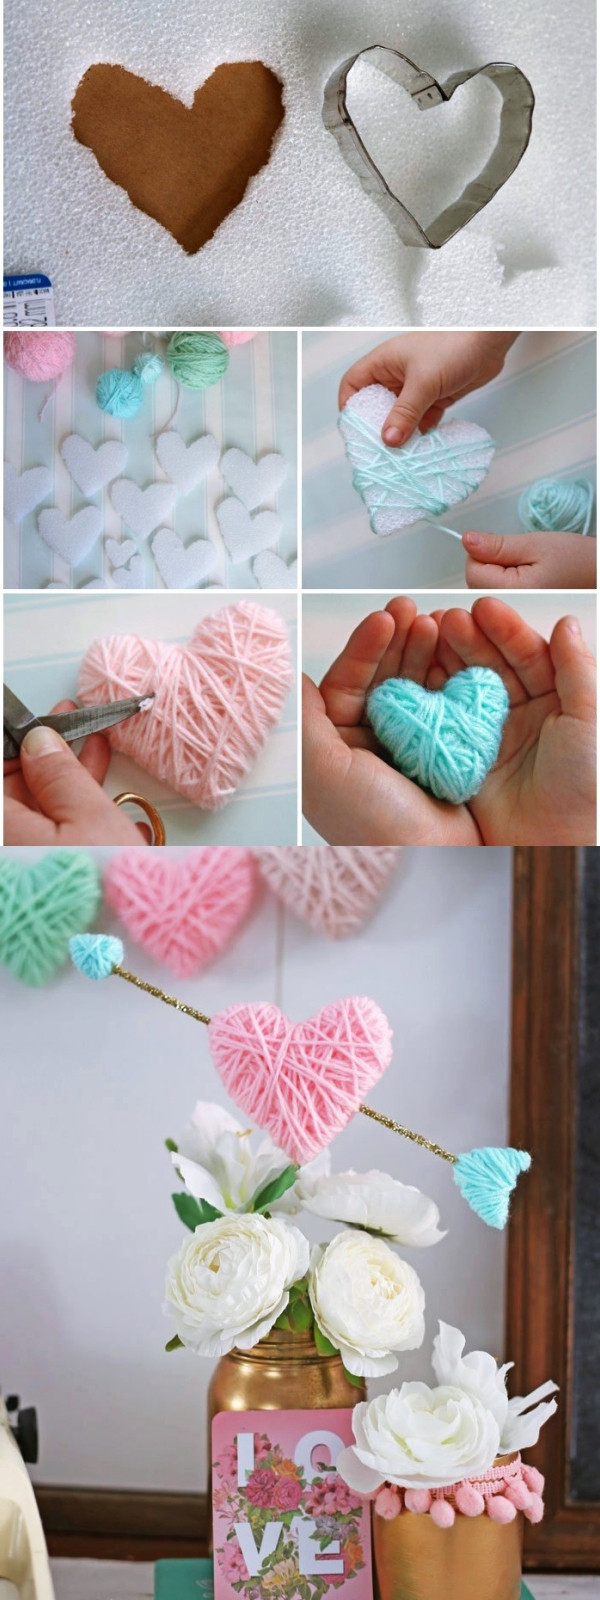 Romantic Ideas For Valentines Day
 30 Cute and Romantic Valentines Day Ideas for Him